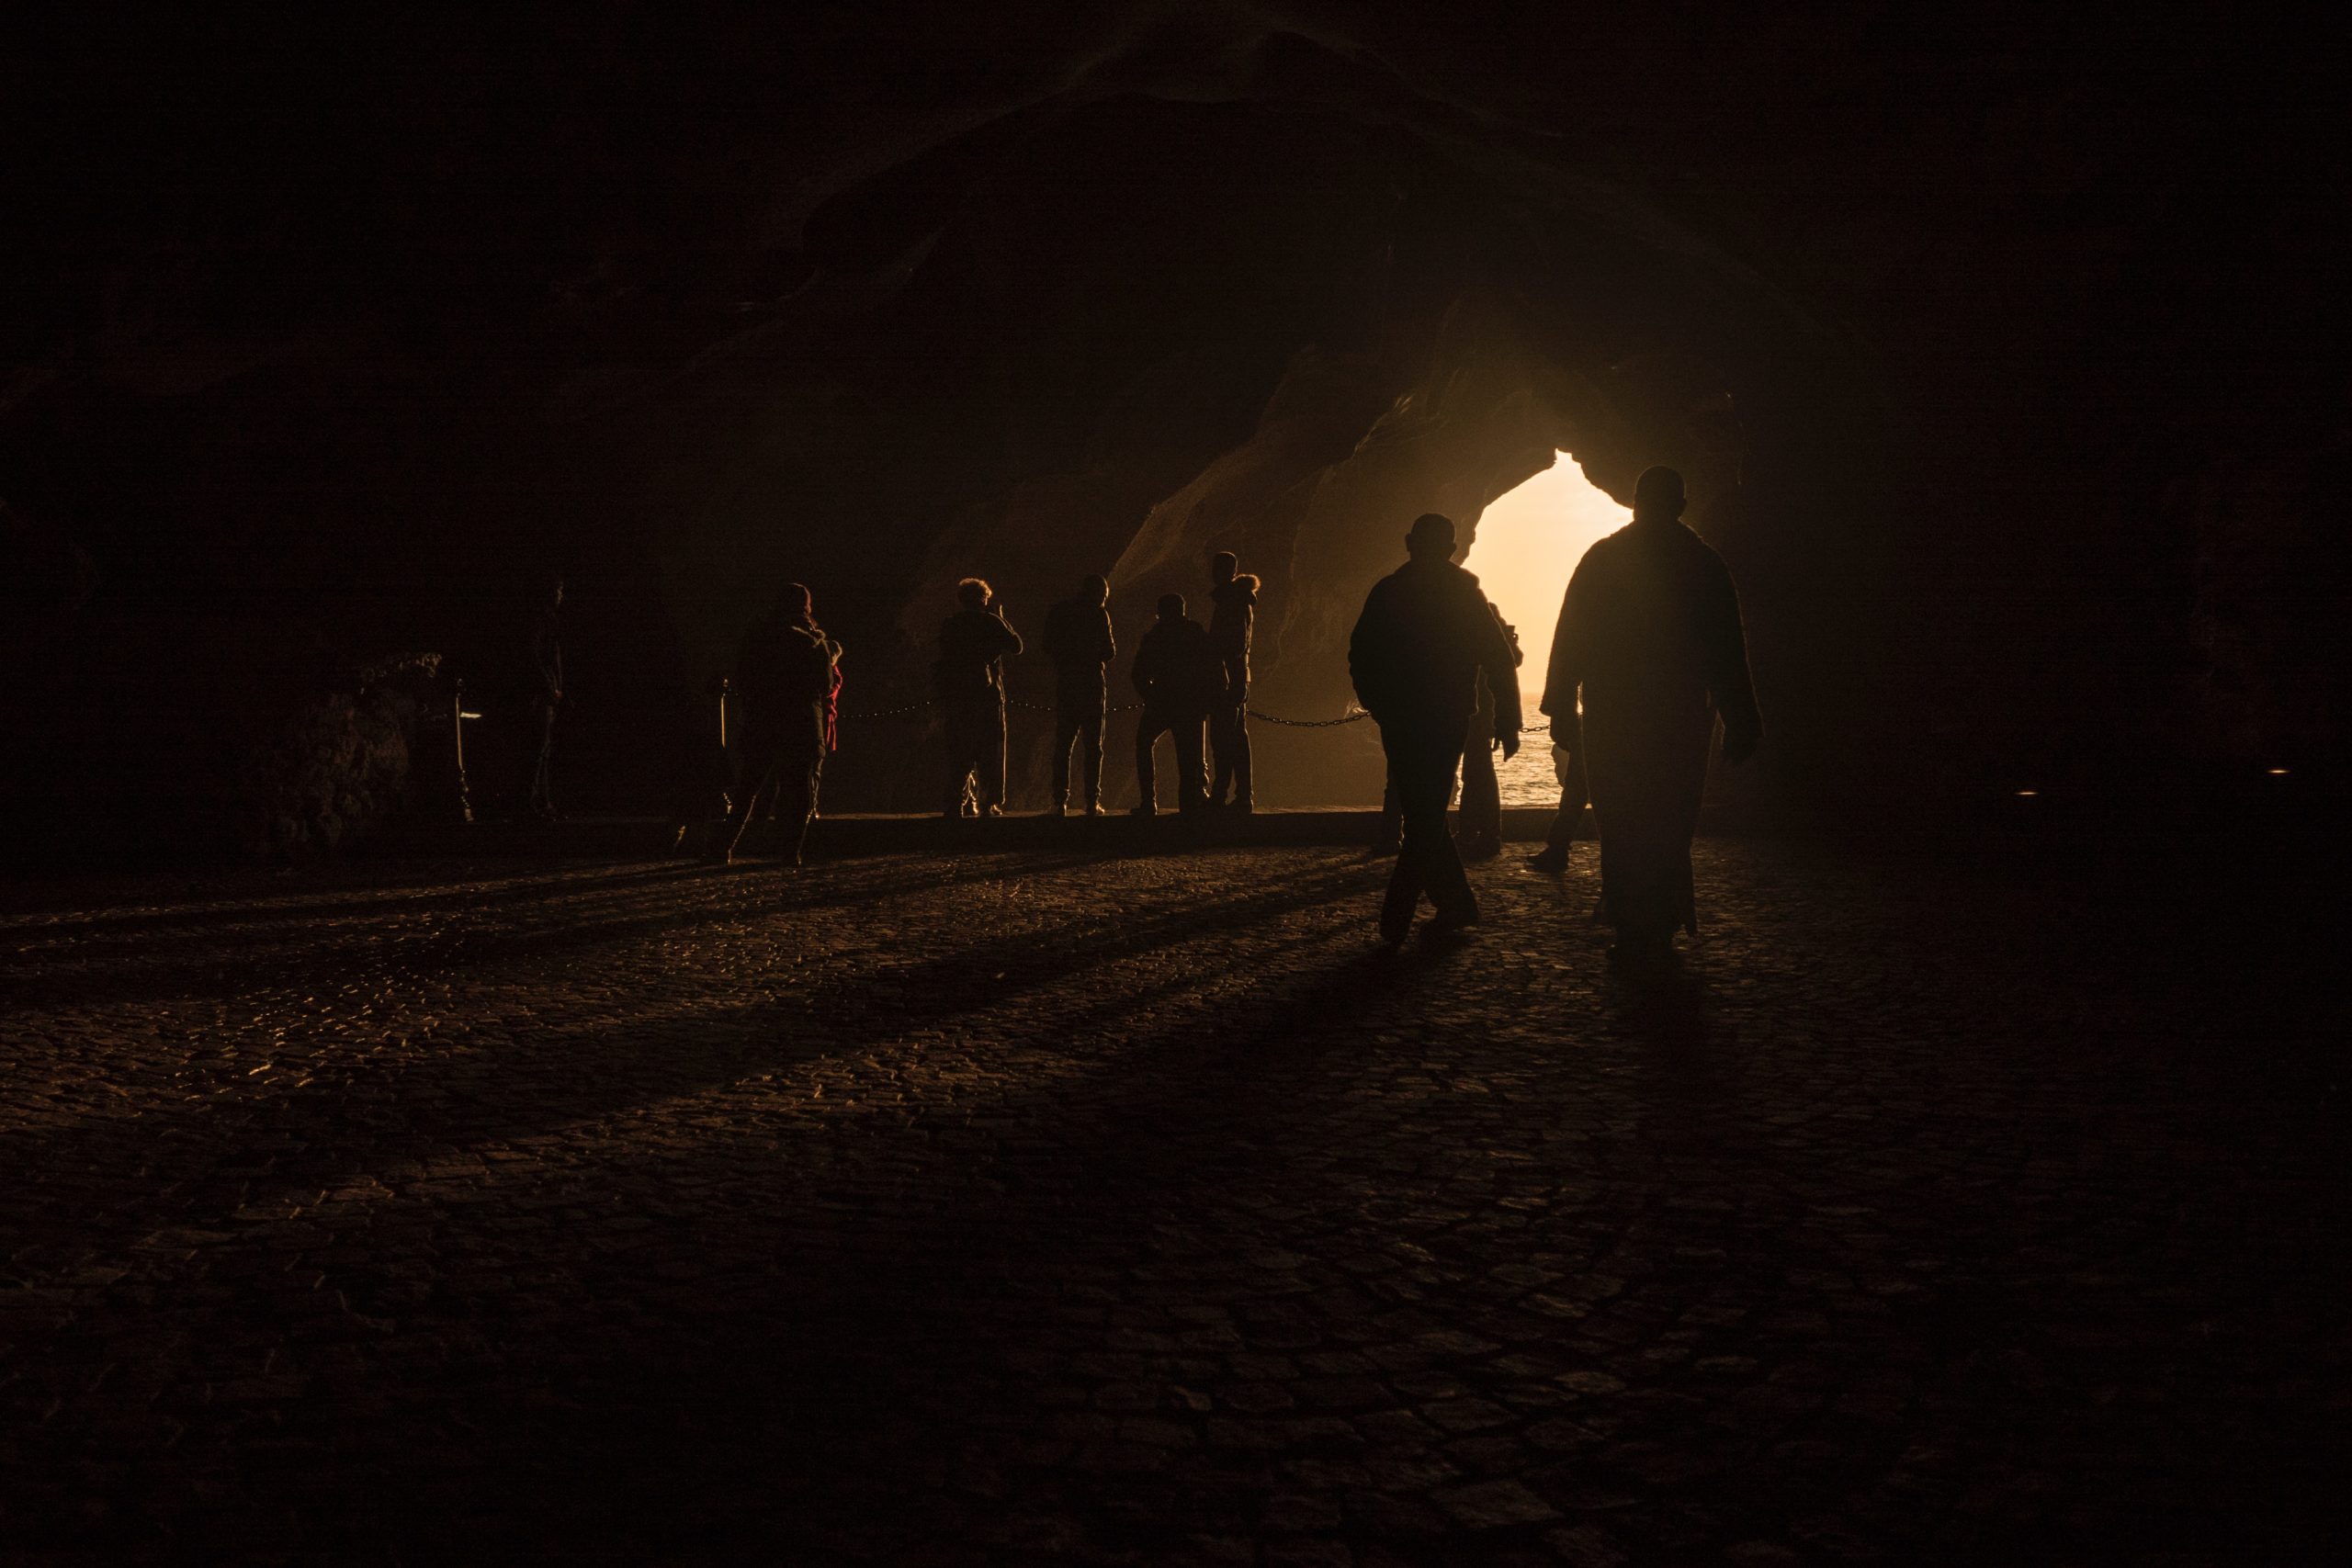 Silhouettes of people in a cave